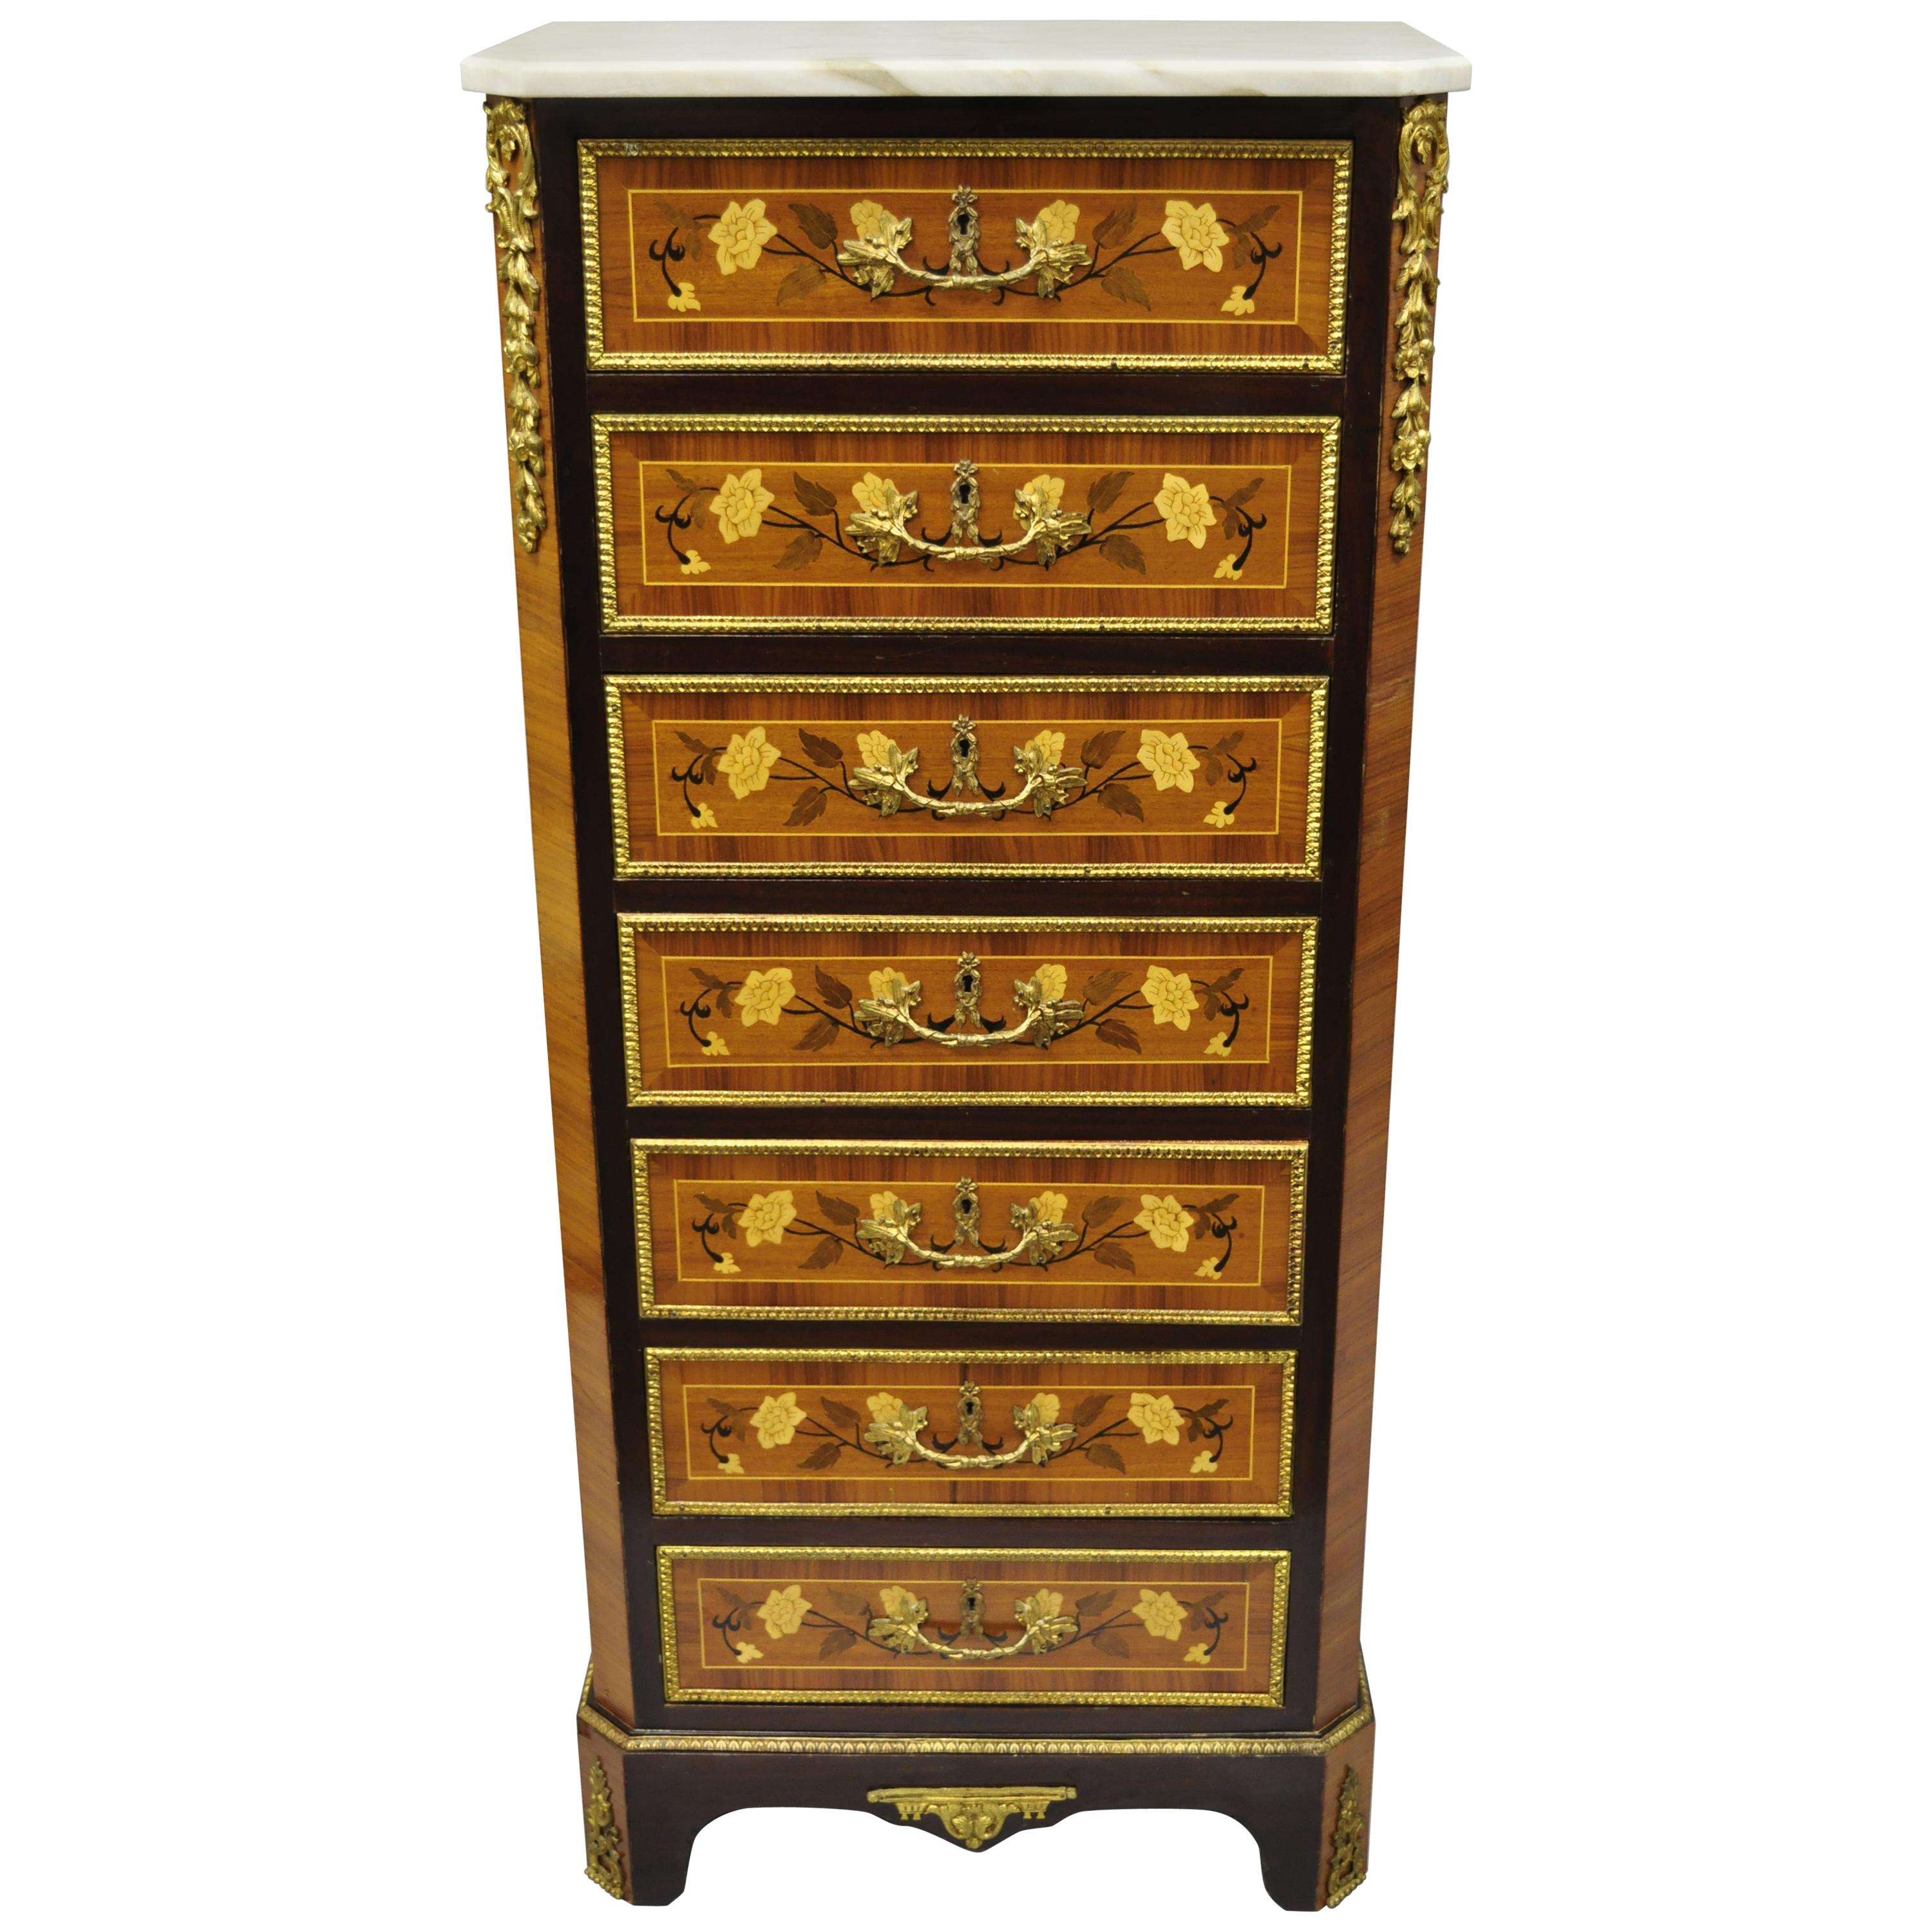 Louis XV French Style Marble-Top Inlaid Seven-Drawer Lingerie Tall Chest